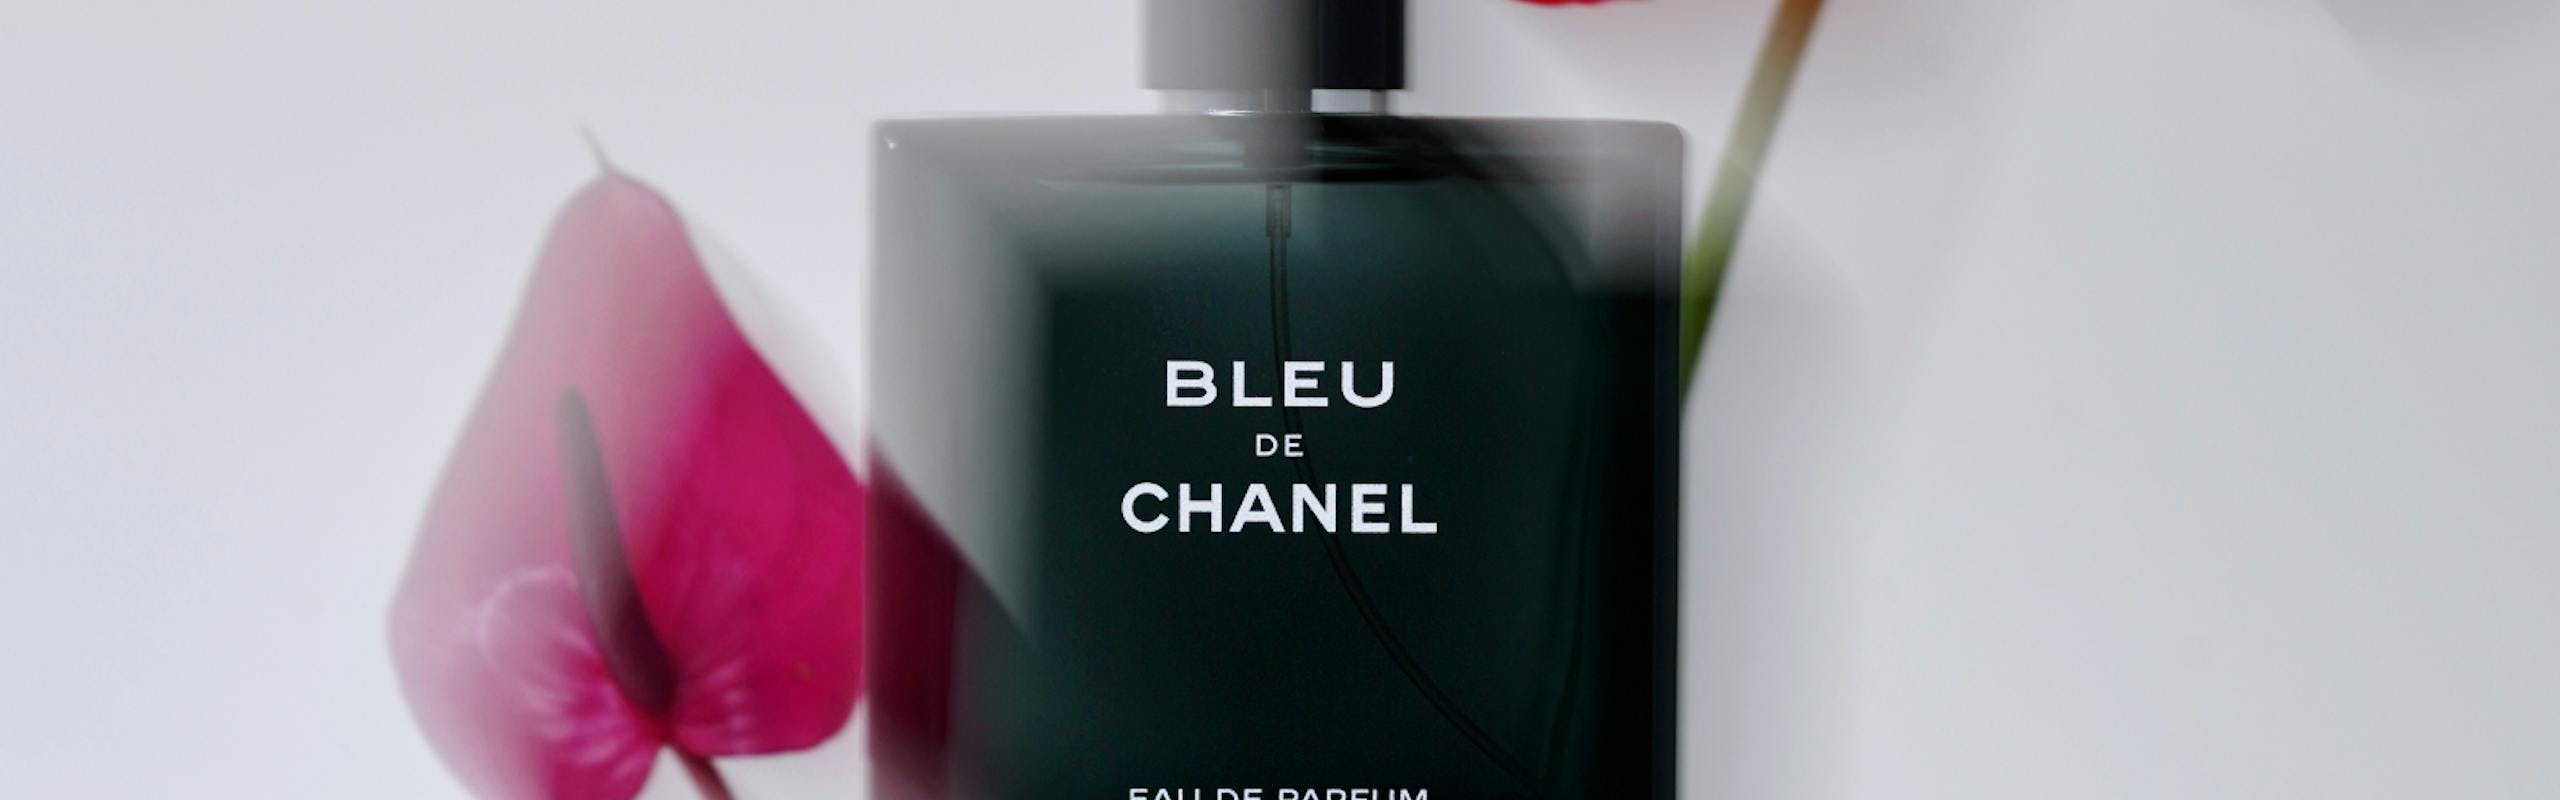 CHANEL BEAUTY BLEU DE CHANEL EAU DE PARFUM, $212 FOR 100ML. Embrace the sensual allure of Bleu de Chanel — an aromatic-woody fragrance that never fails to leave us captivated. Composed of notes like sandalwood, ambery cedar, and tonka bean, this cologne perfectly complements today’s power woman.